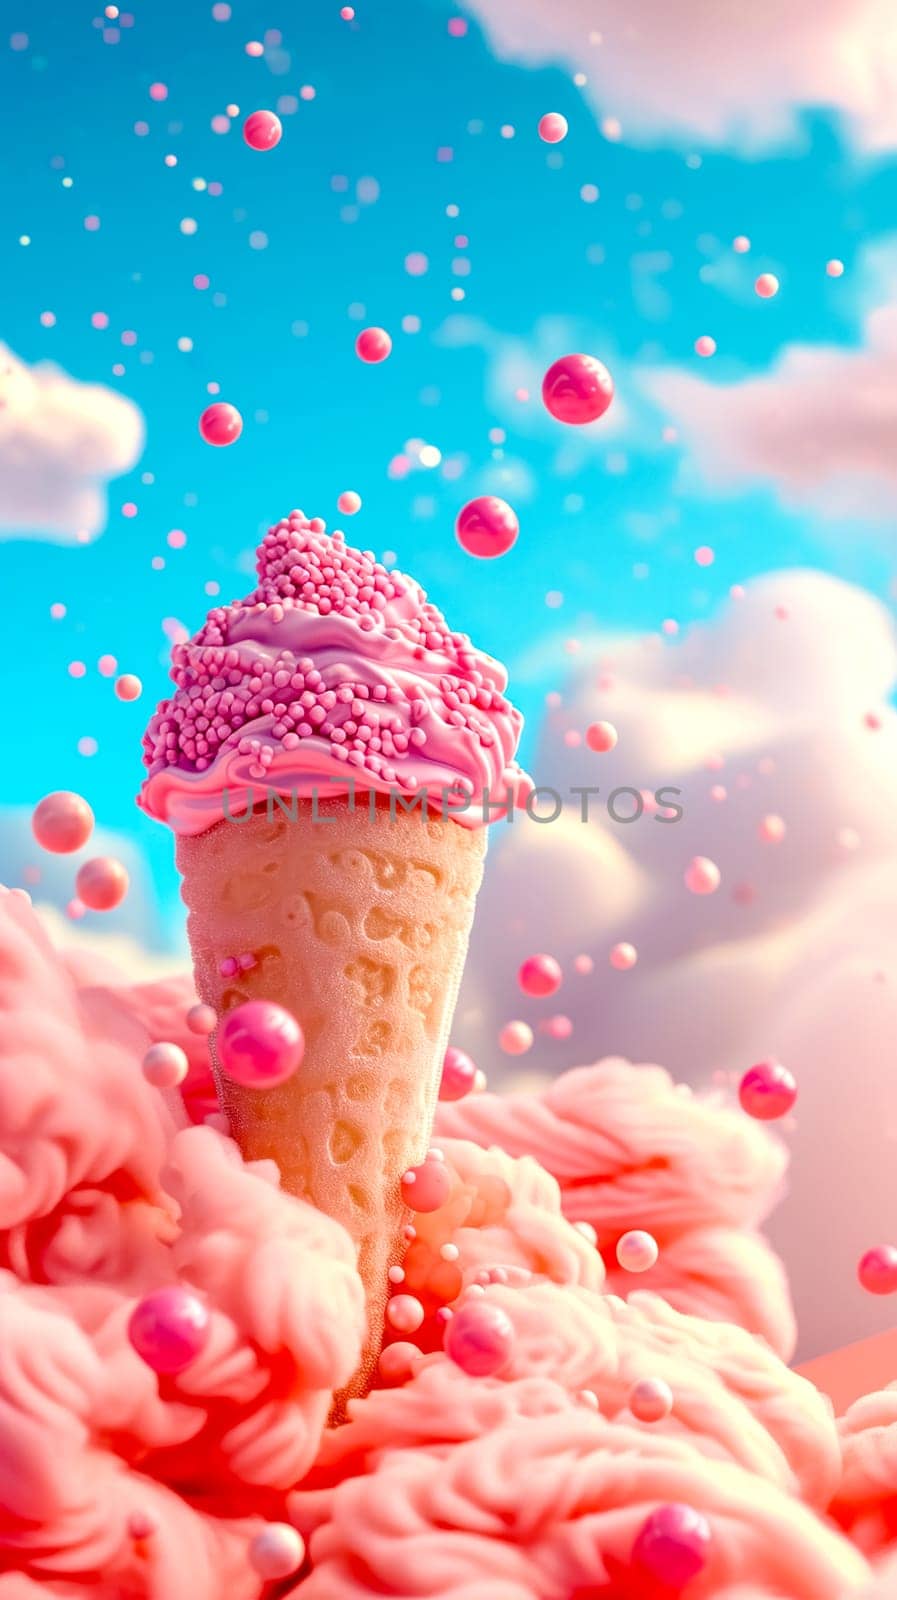 pink ice cream cone adorned with various embellishments, set against a backdrop of fluffy pink clouds and falling beads, vertical